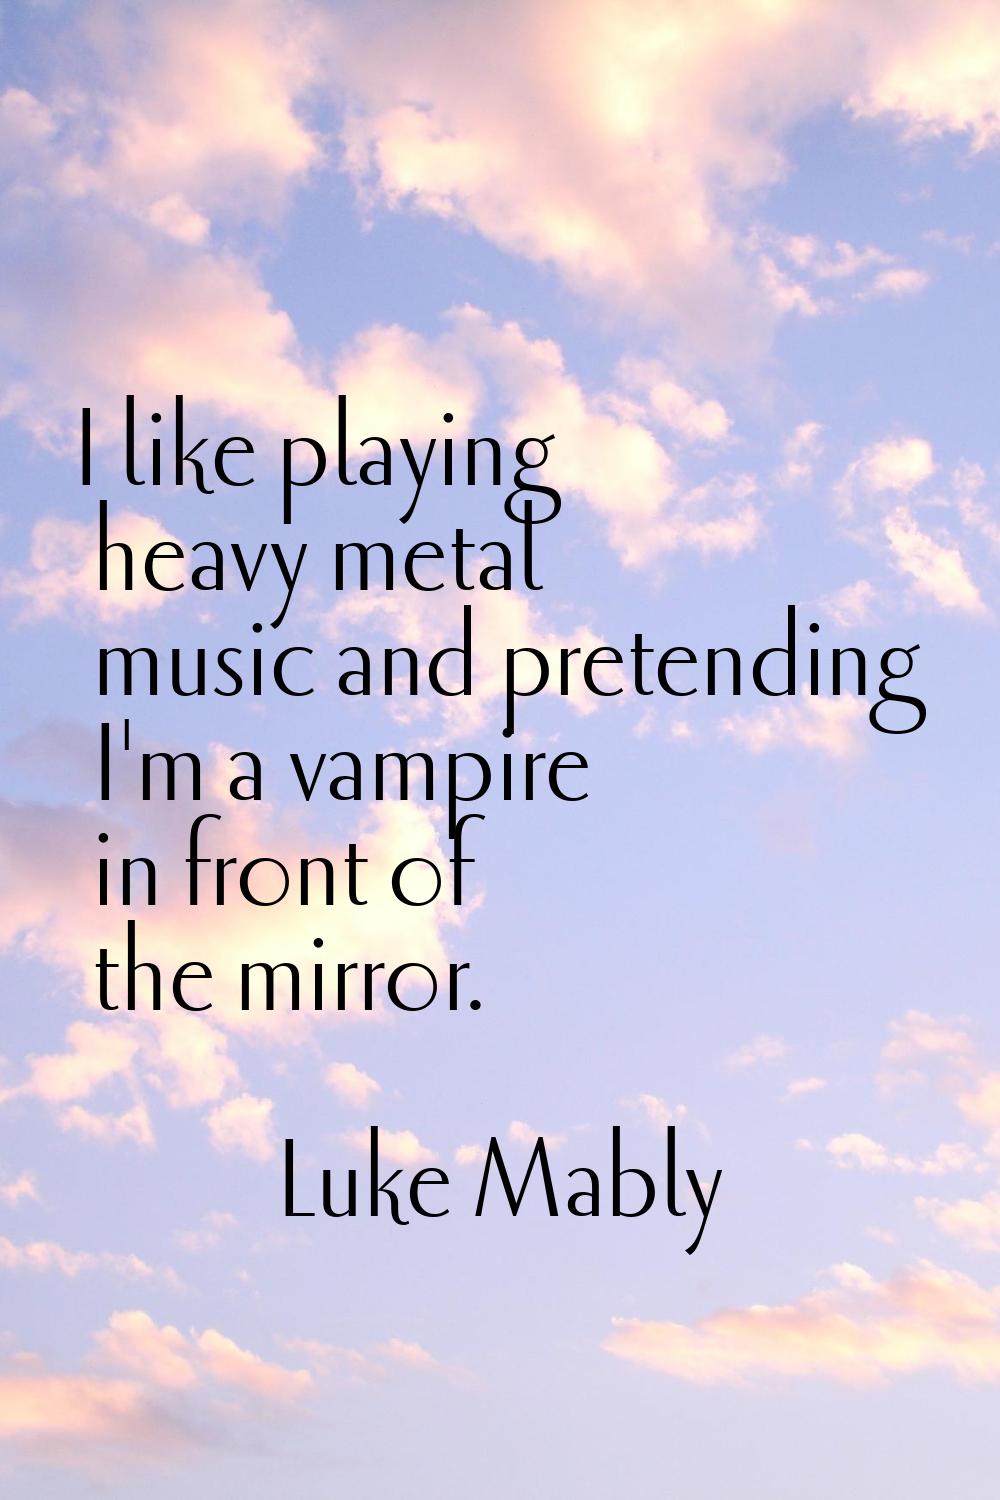 I like playing heavy metal music and pretending I'm a vampire in front of the mirror.